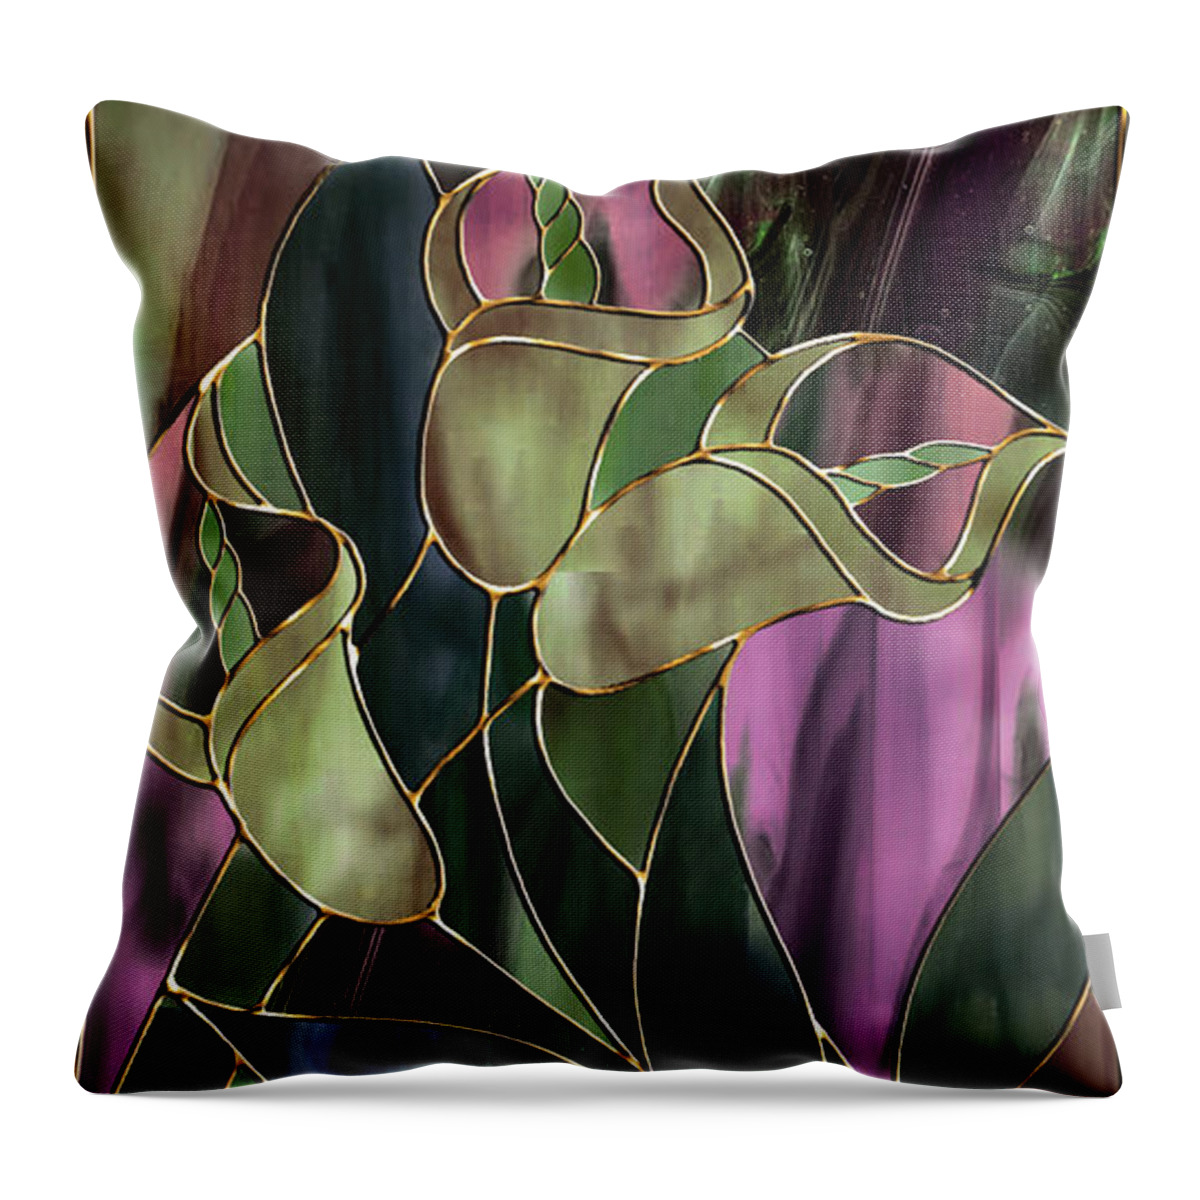 Stained Glass Throw Pillow featuring the painting Stained Glass Khaki Callas by Mindy Sommers